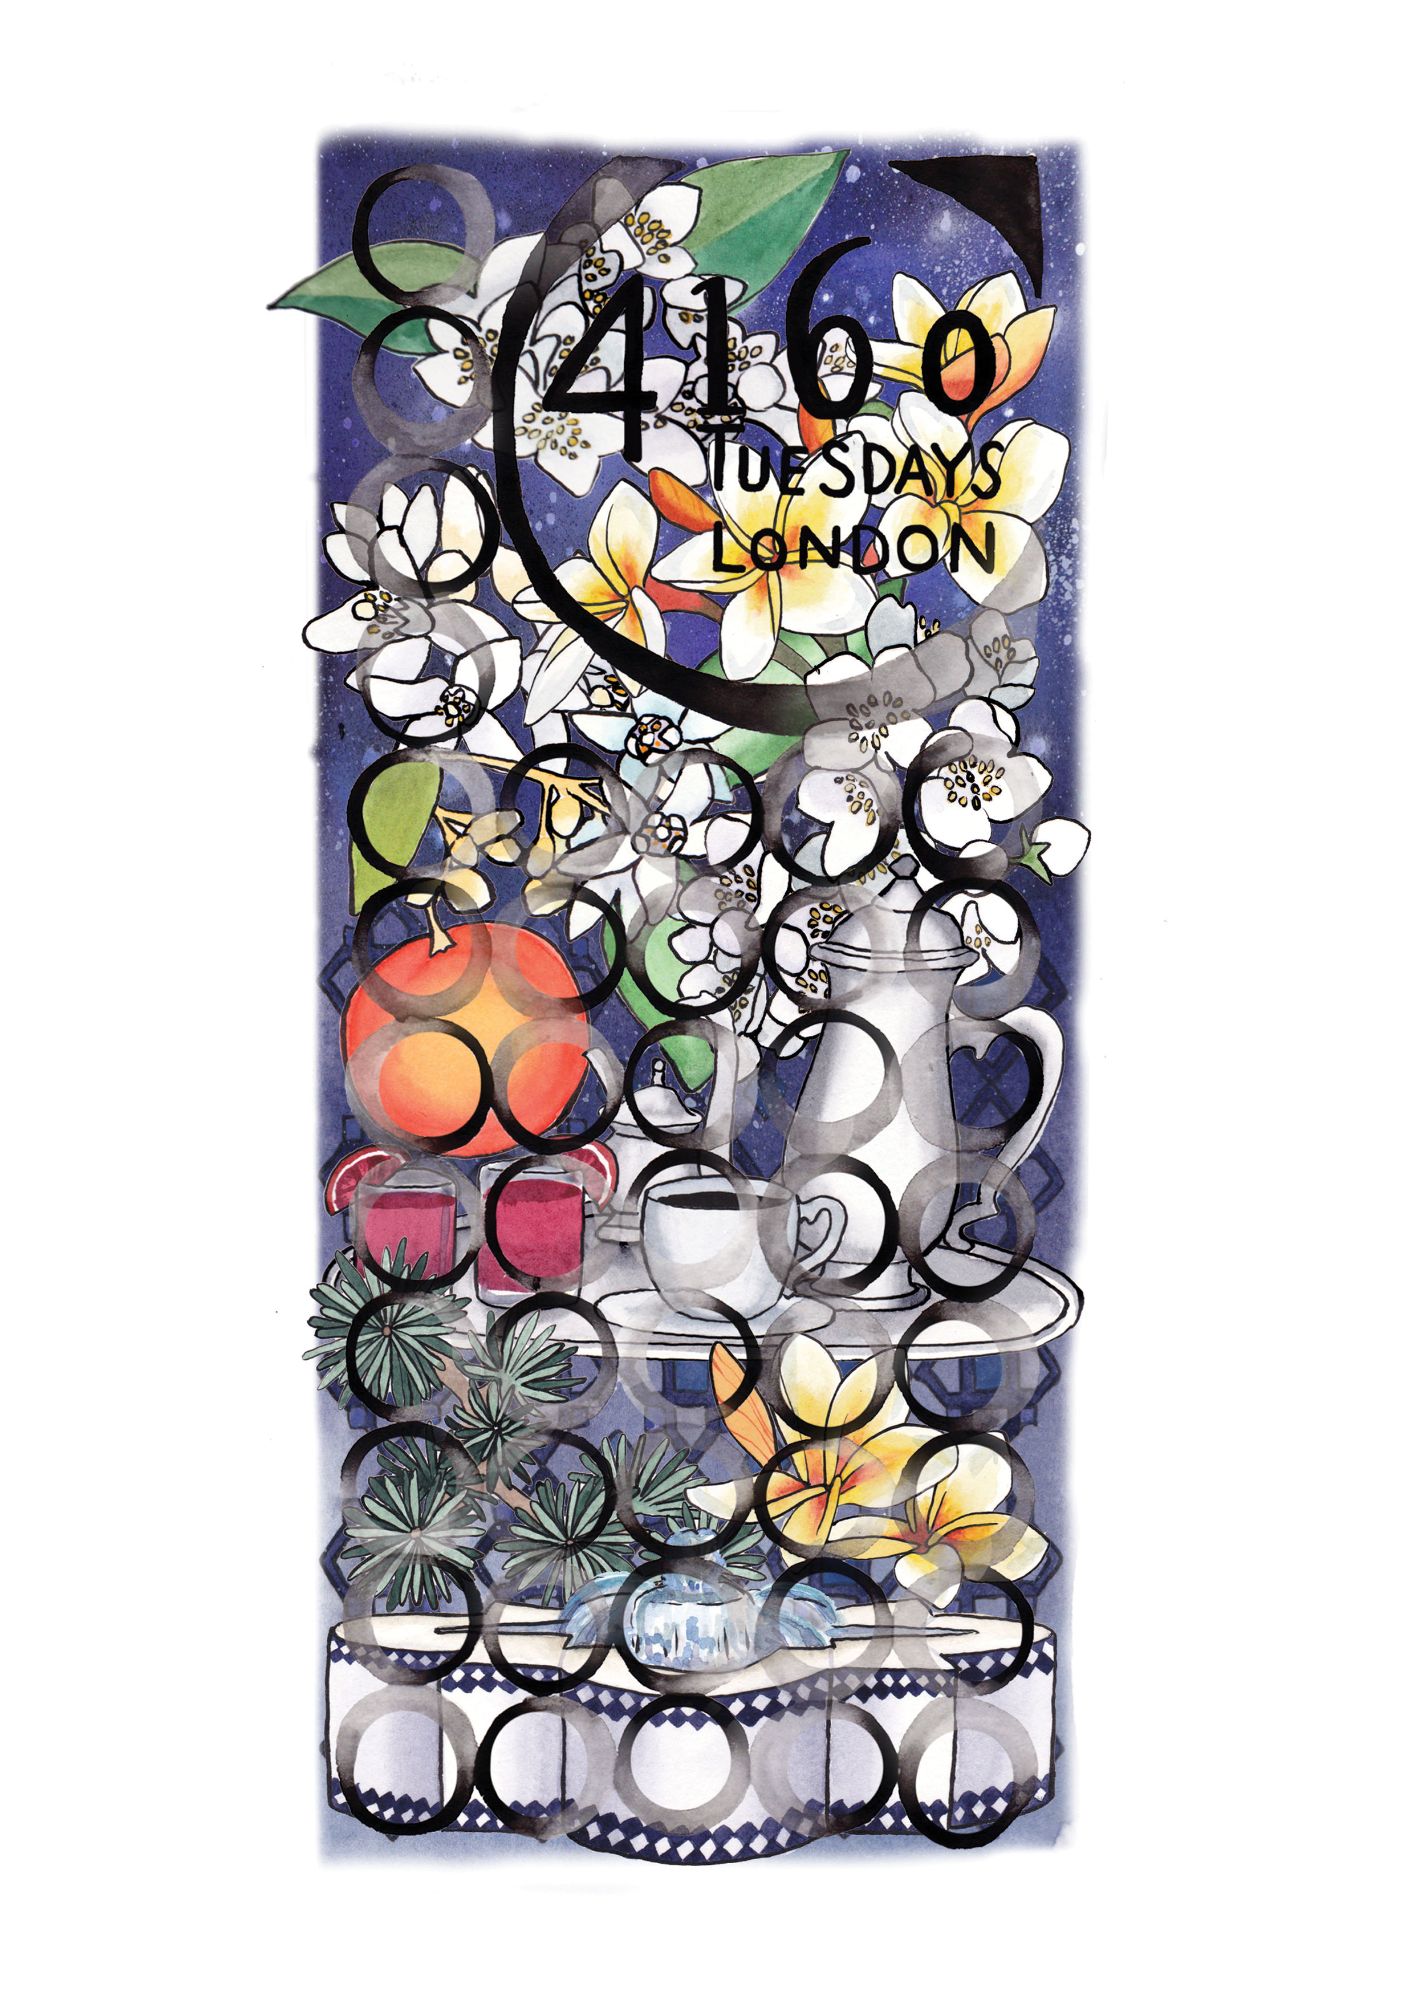 Stylised graphic containing white and yellow flowers, leaves, herbs, fruit and a table holding cups of coffee.